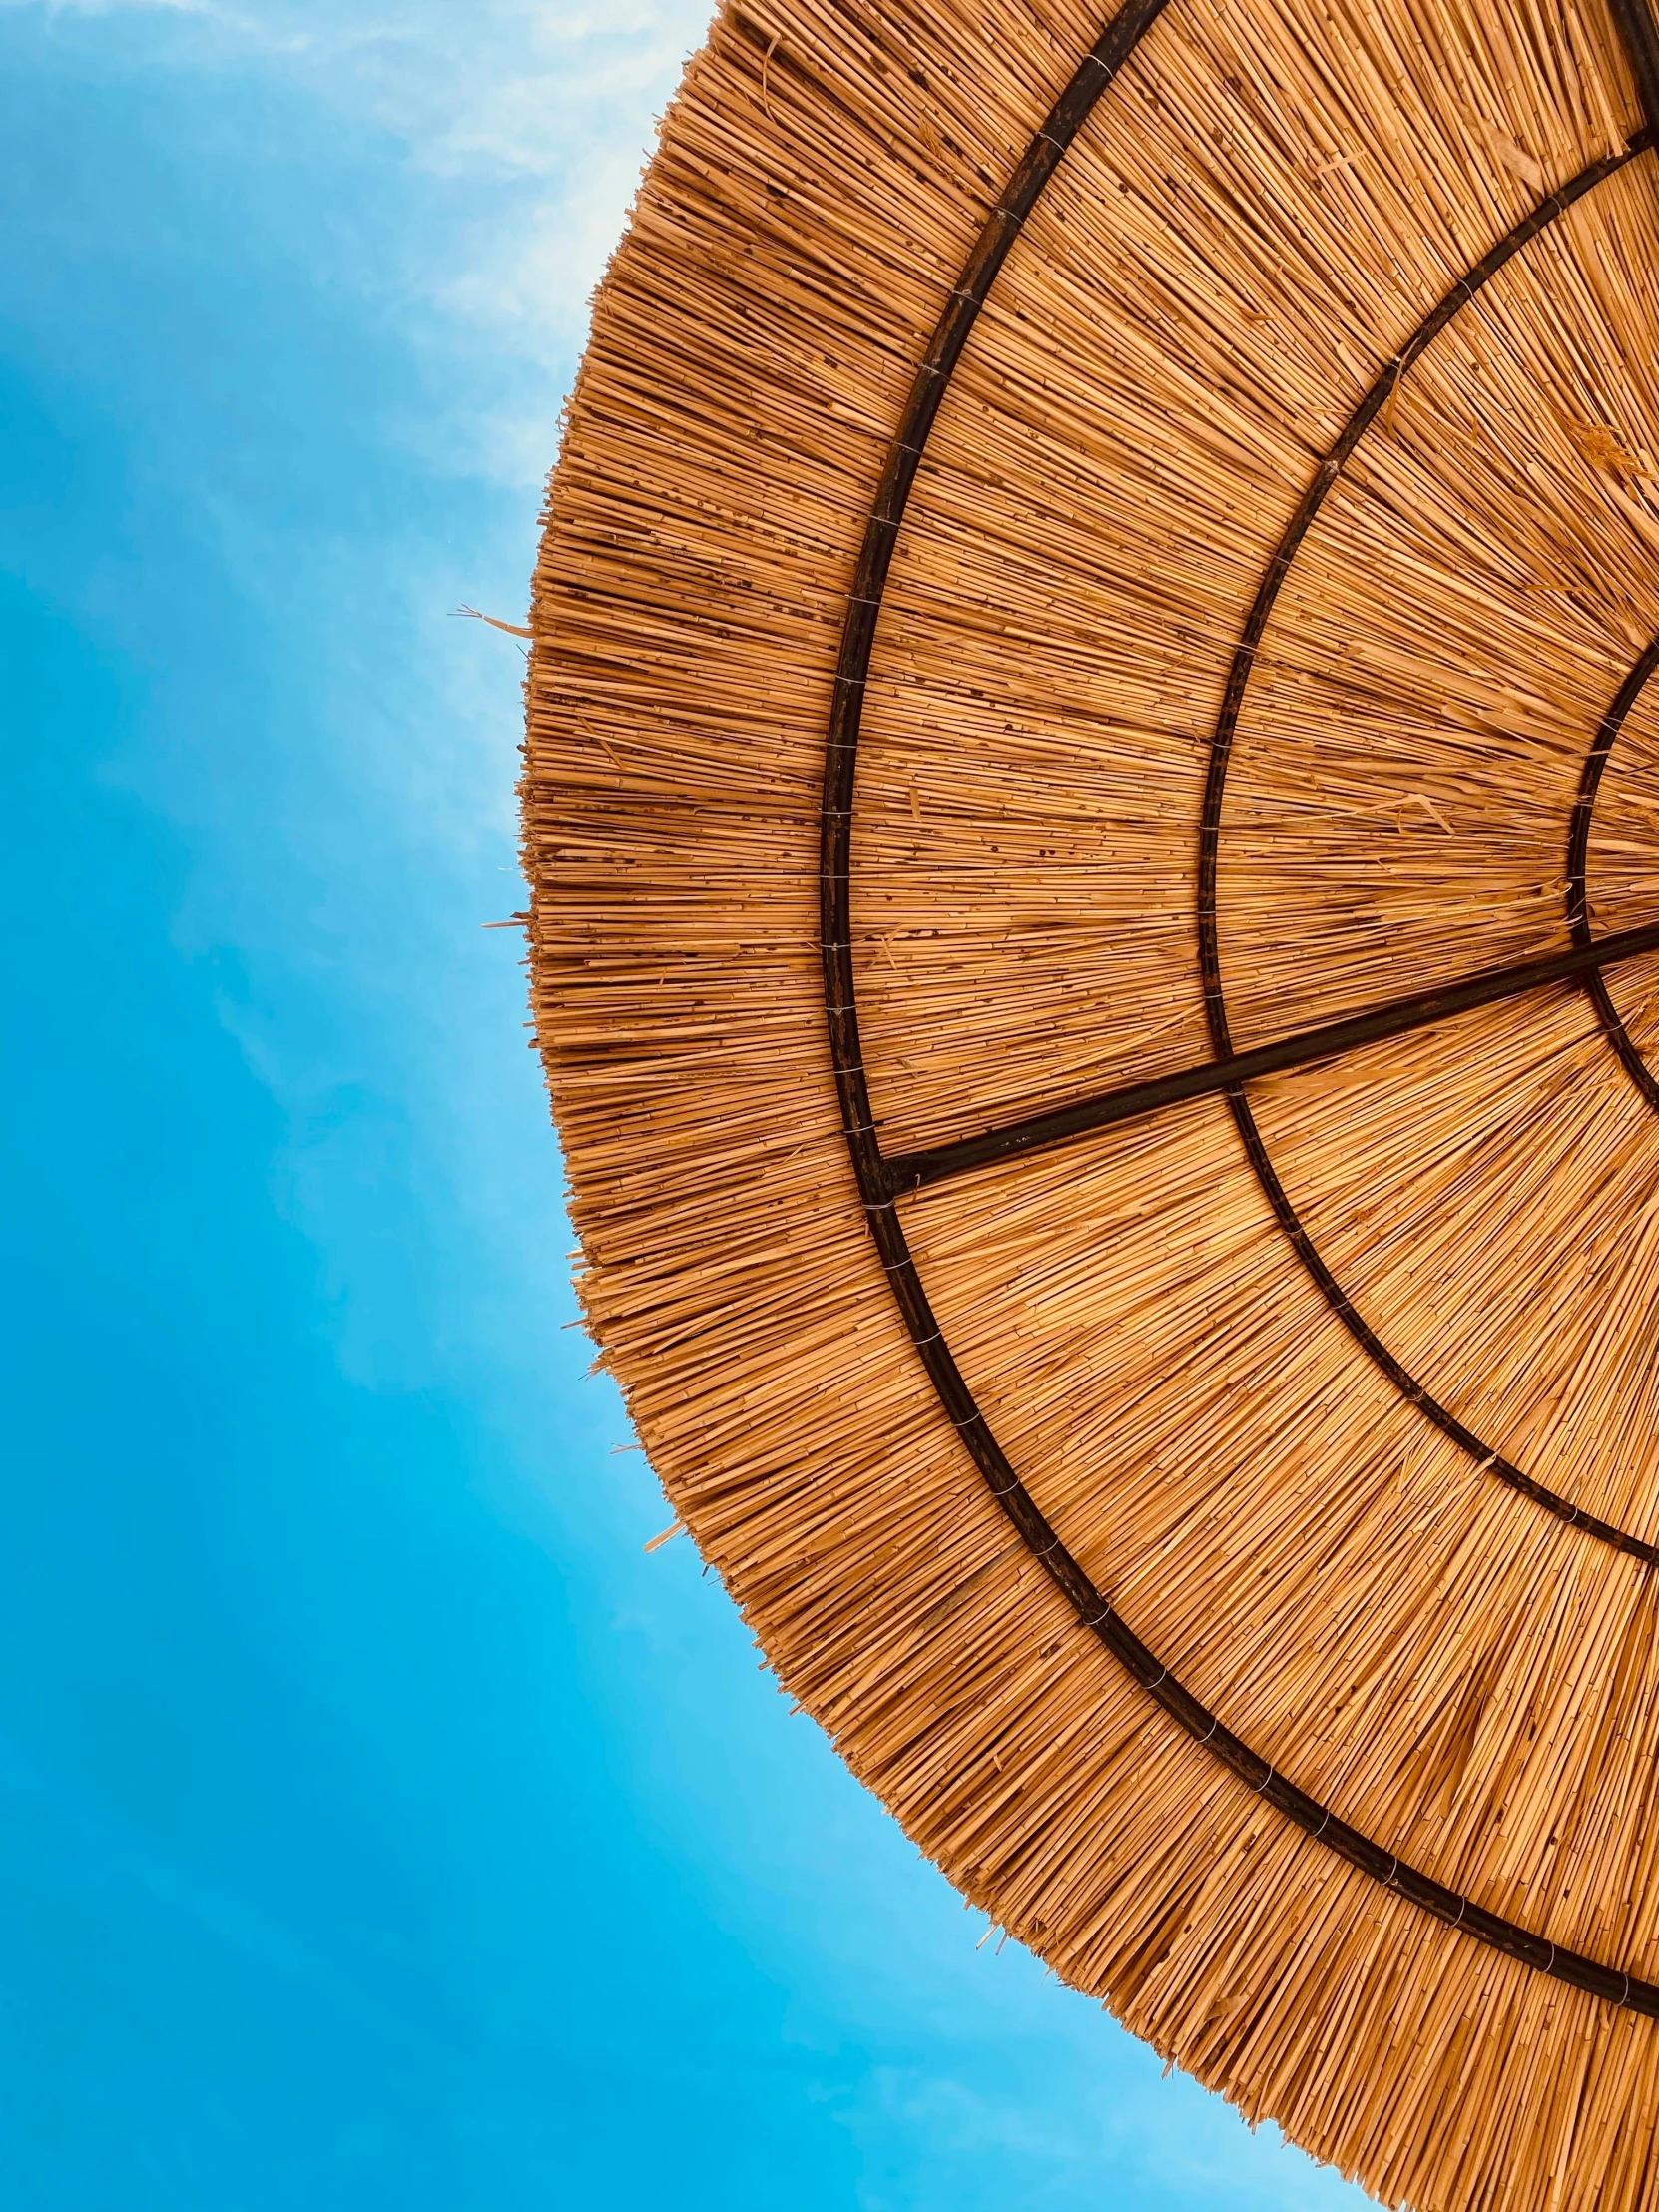 an umbrella with a blue sky in the background, an album cover, by Matthias Stom, trending on unsplash, renaissance, made of bamboo, straw, tan complexion, round format